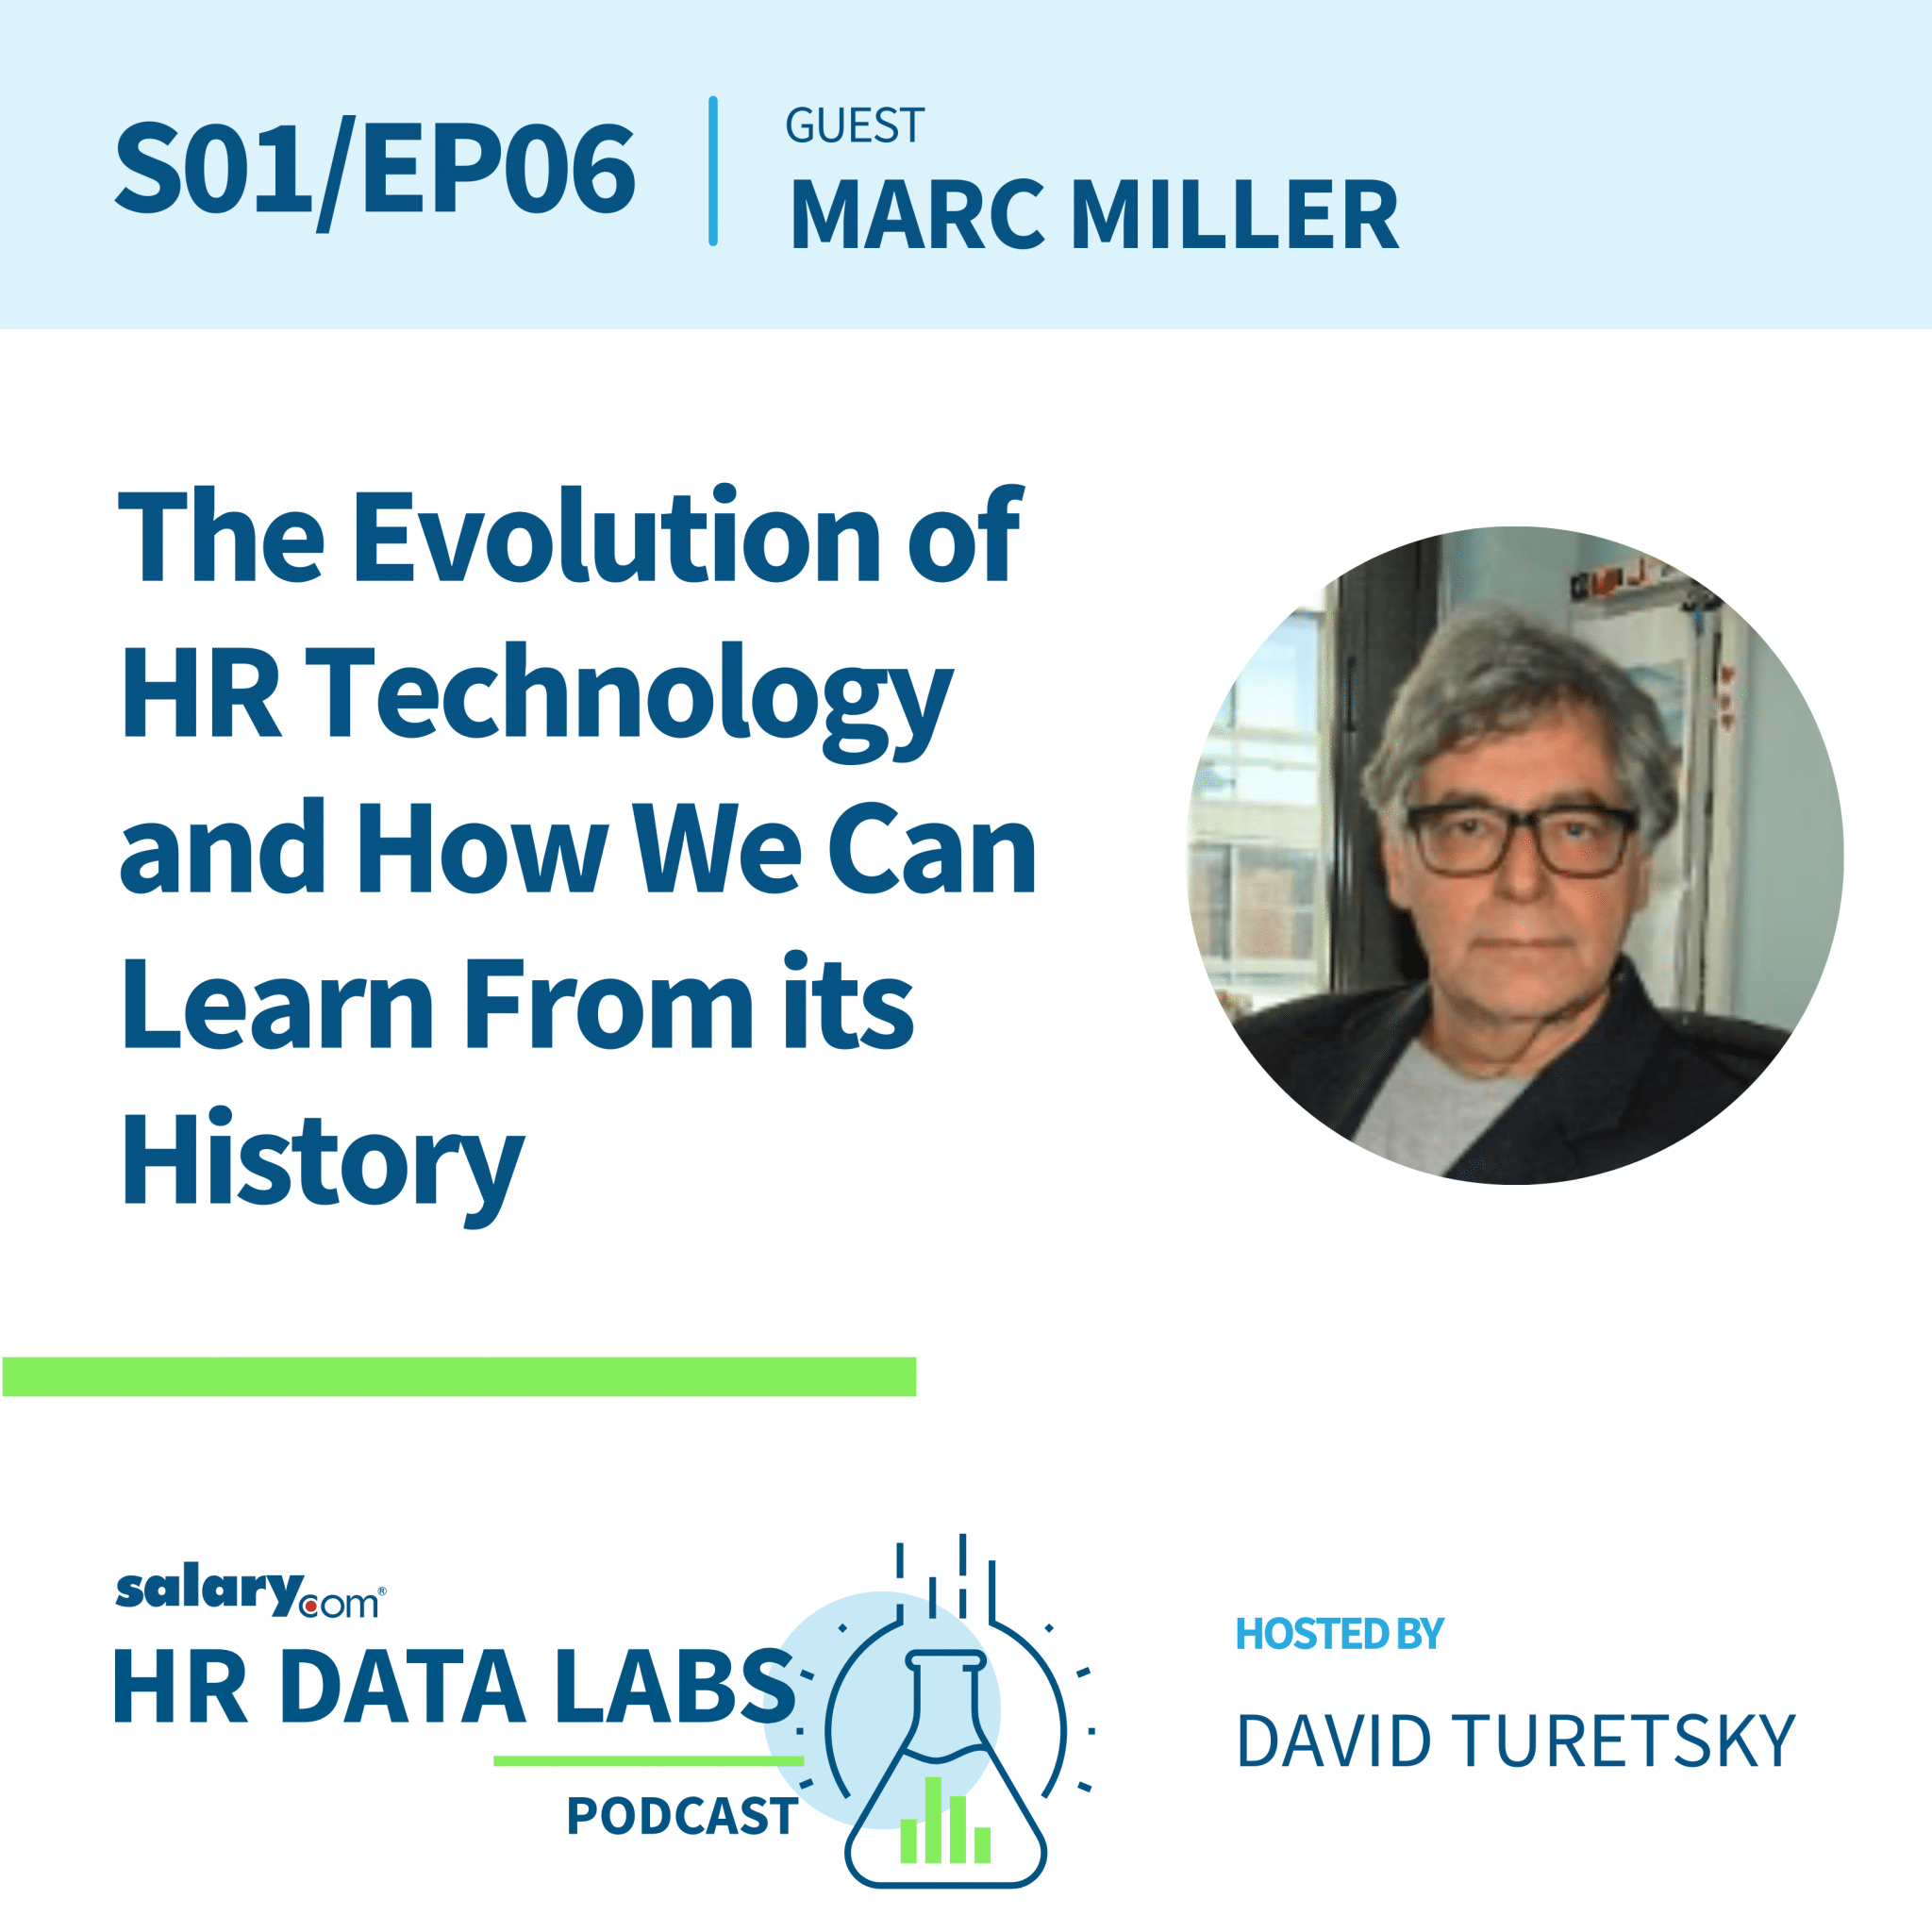 The Evolution of HR Technology and How We Can Learn From its History